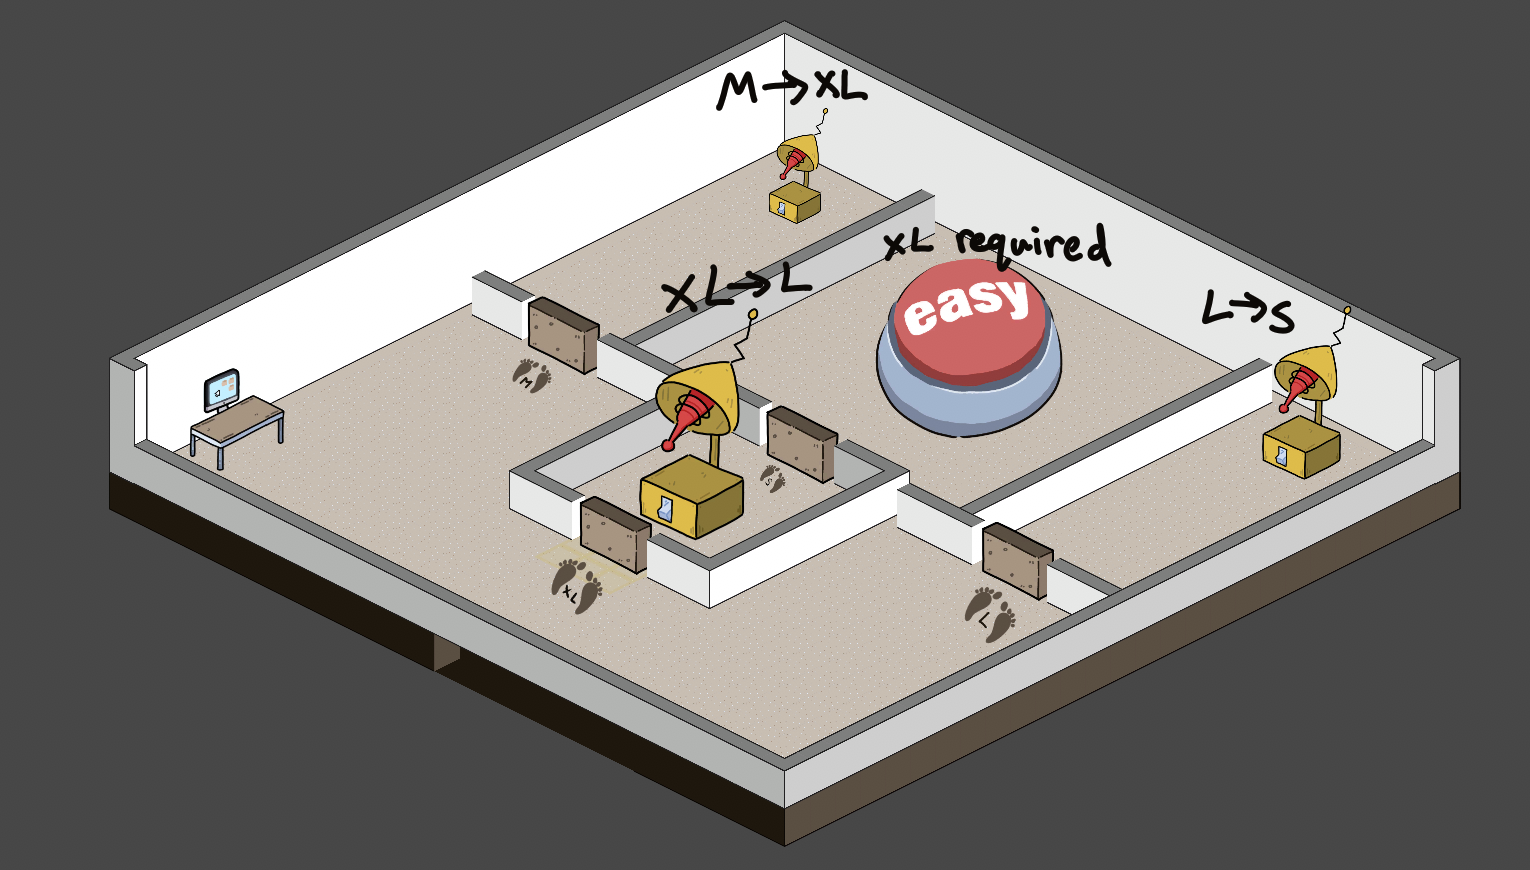 Image of the new room with the Staples Easy button.